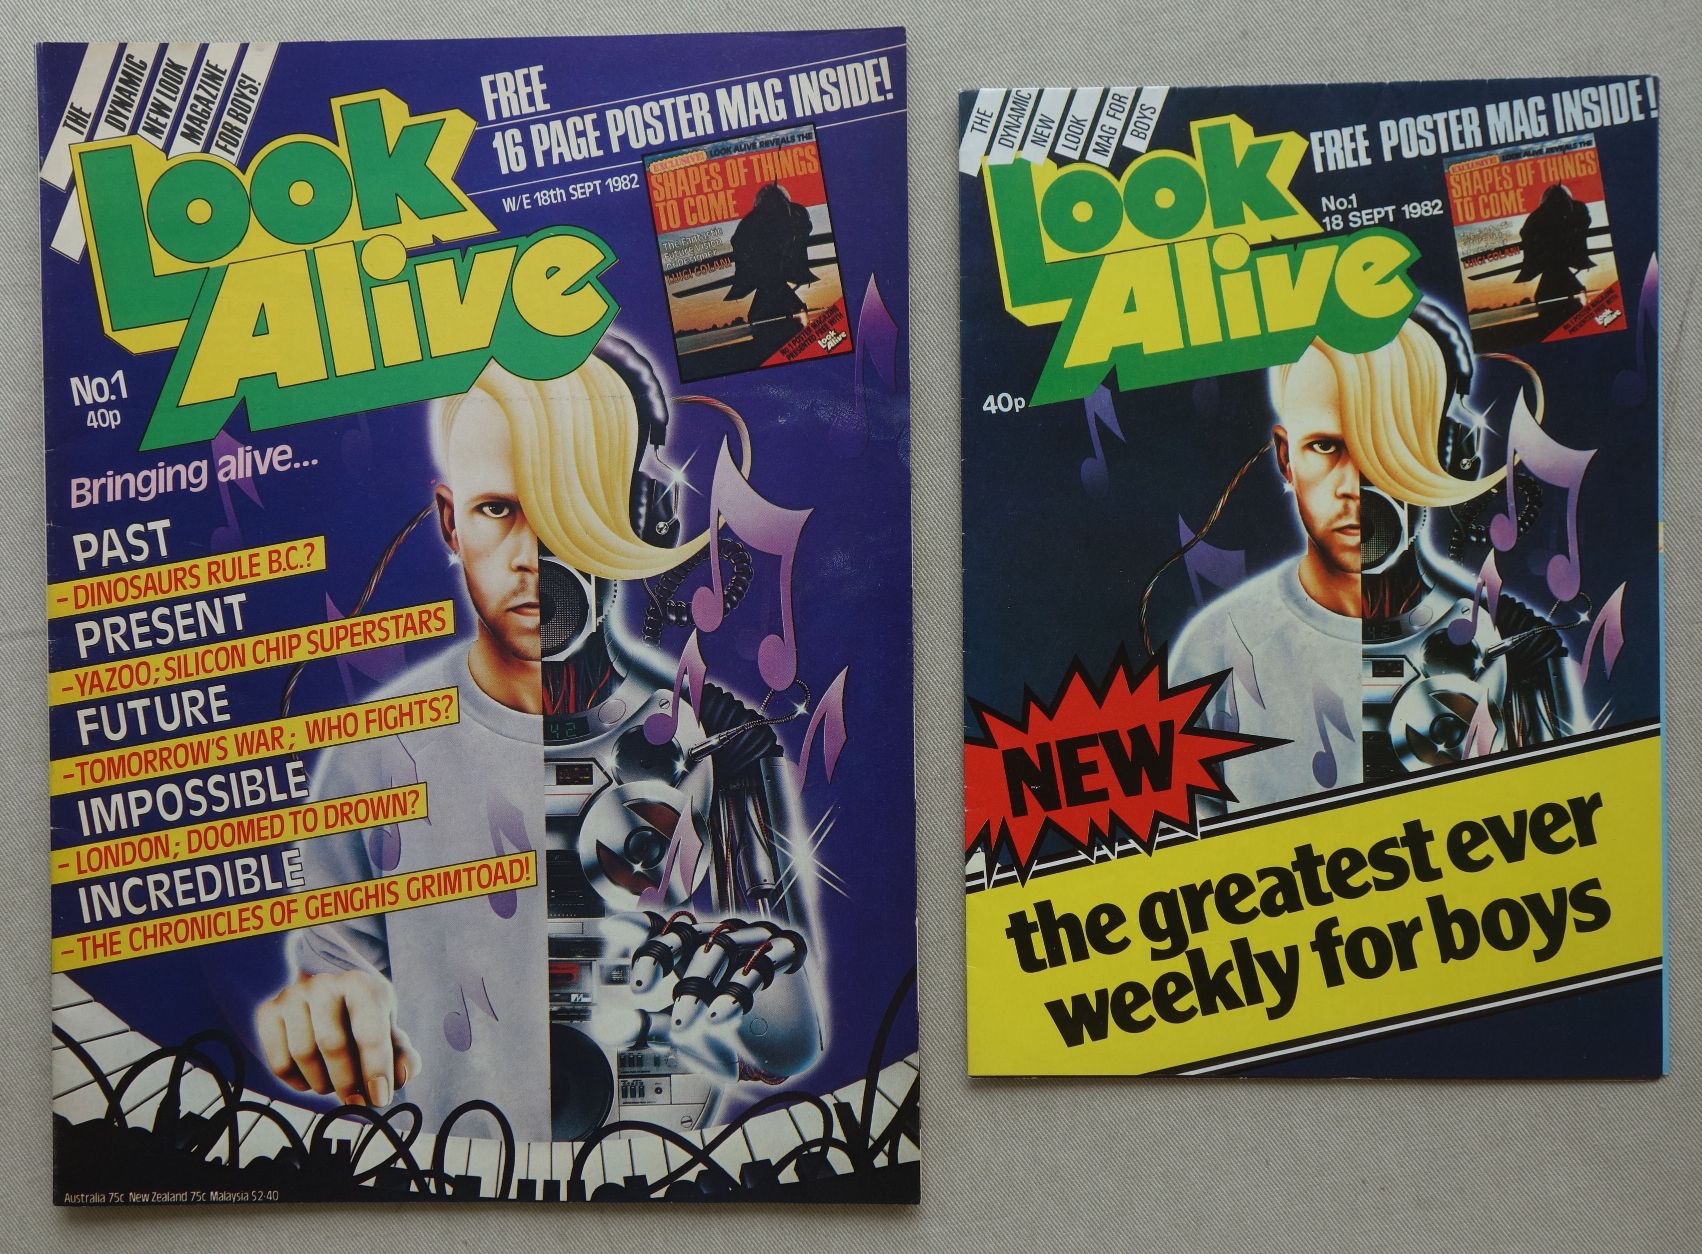 Look Alive magazine Issue 1 - cover dated 18th September 1982, and Preview Poster Magazine